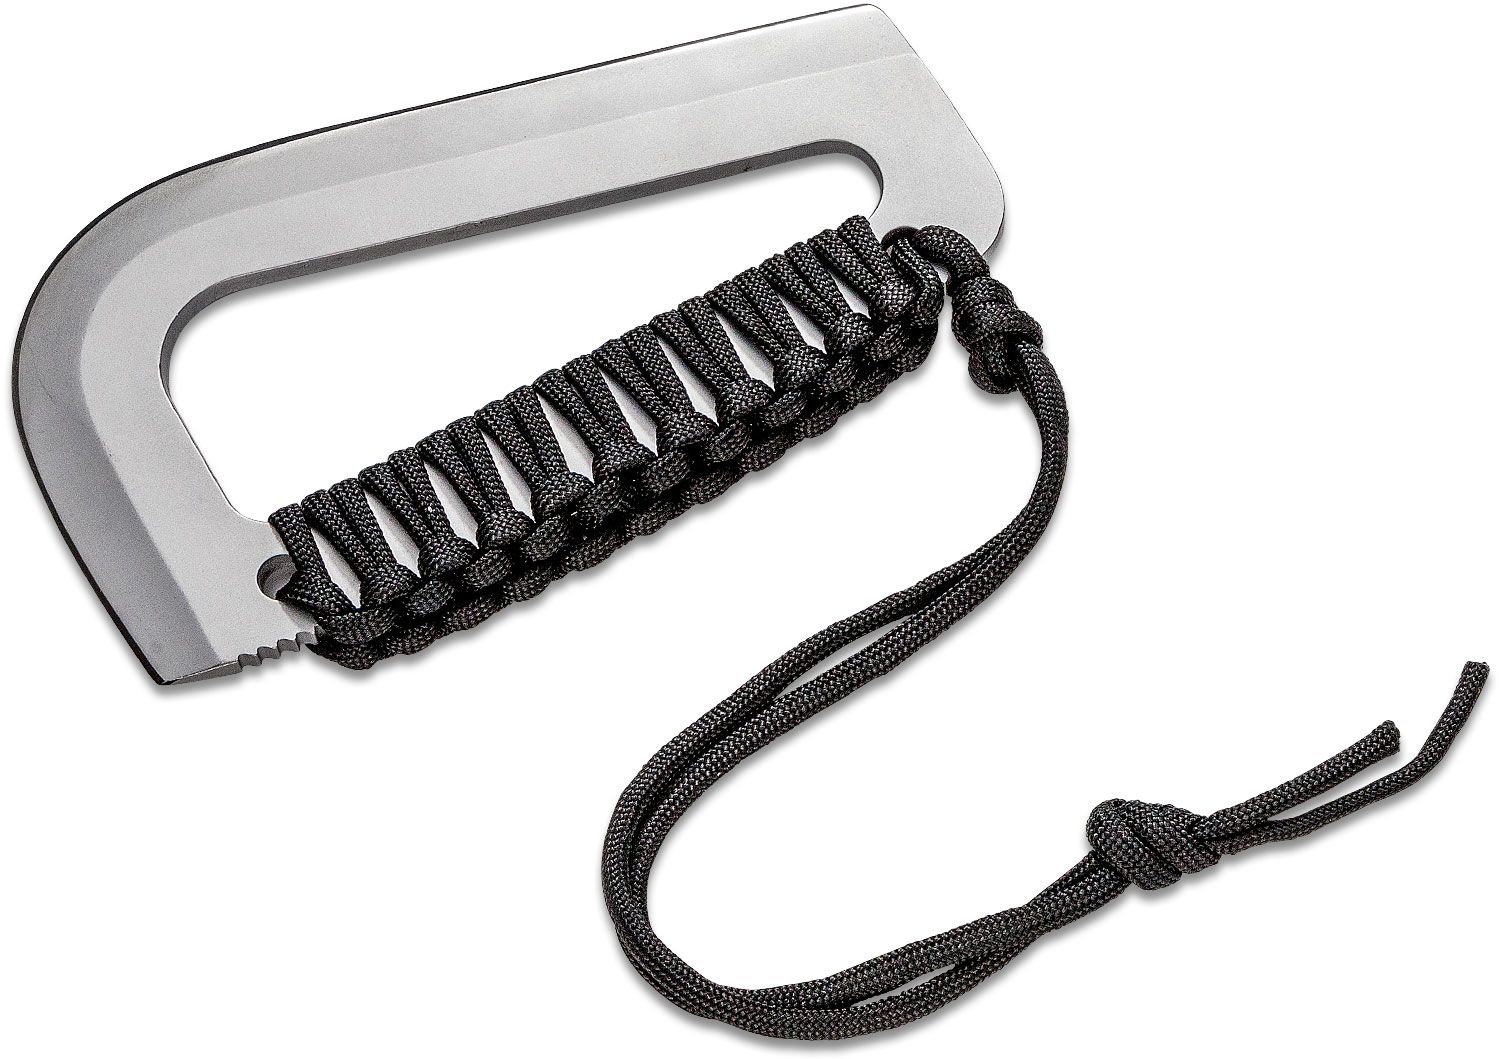 Fremont Knives Farson Blade Survival Tool, 6 Overall, Black Paracord  Handle - KnifeCenter - 100-002